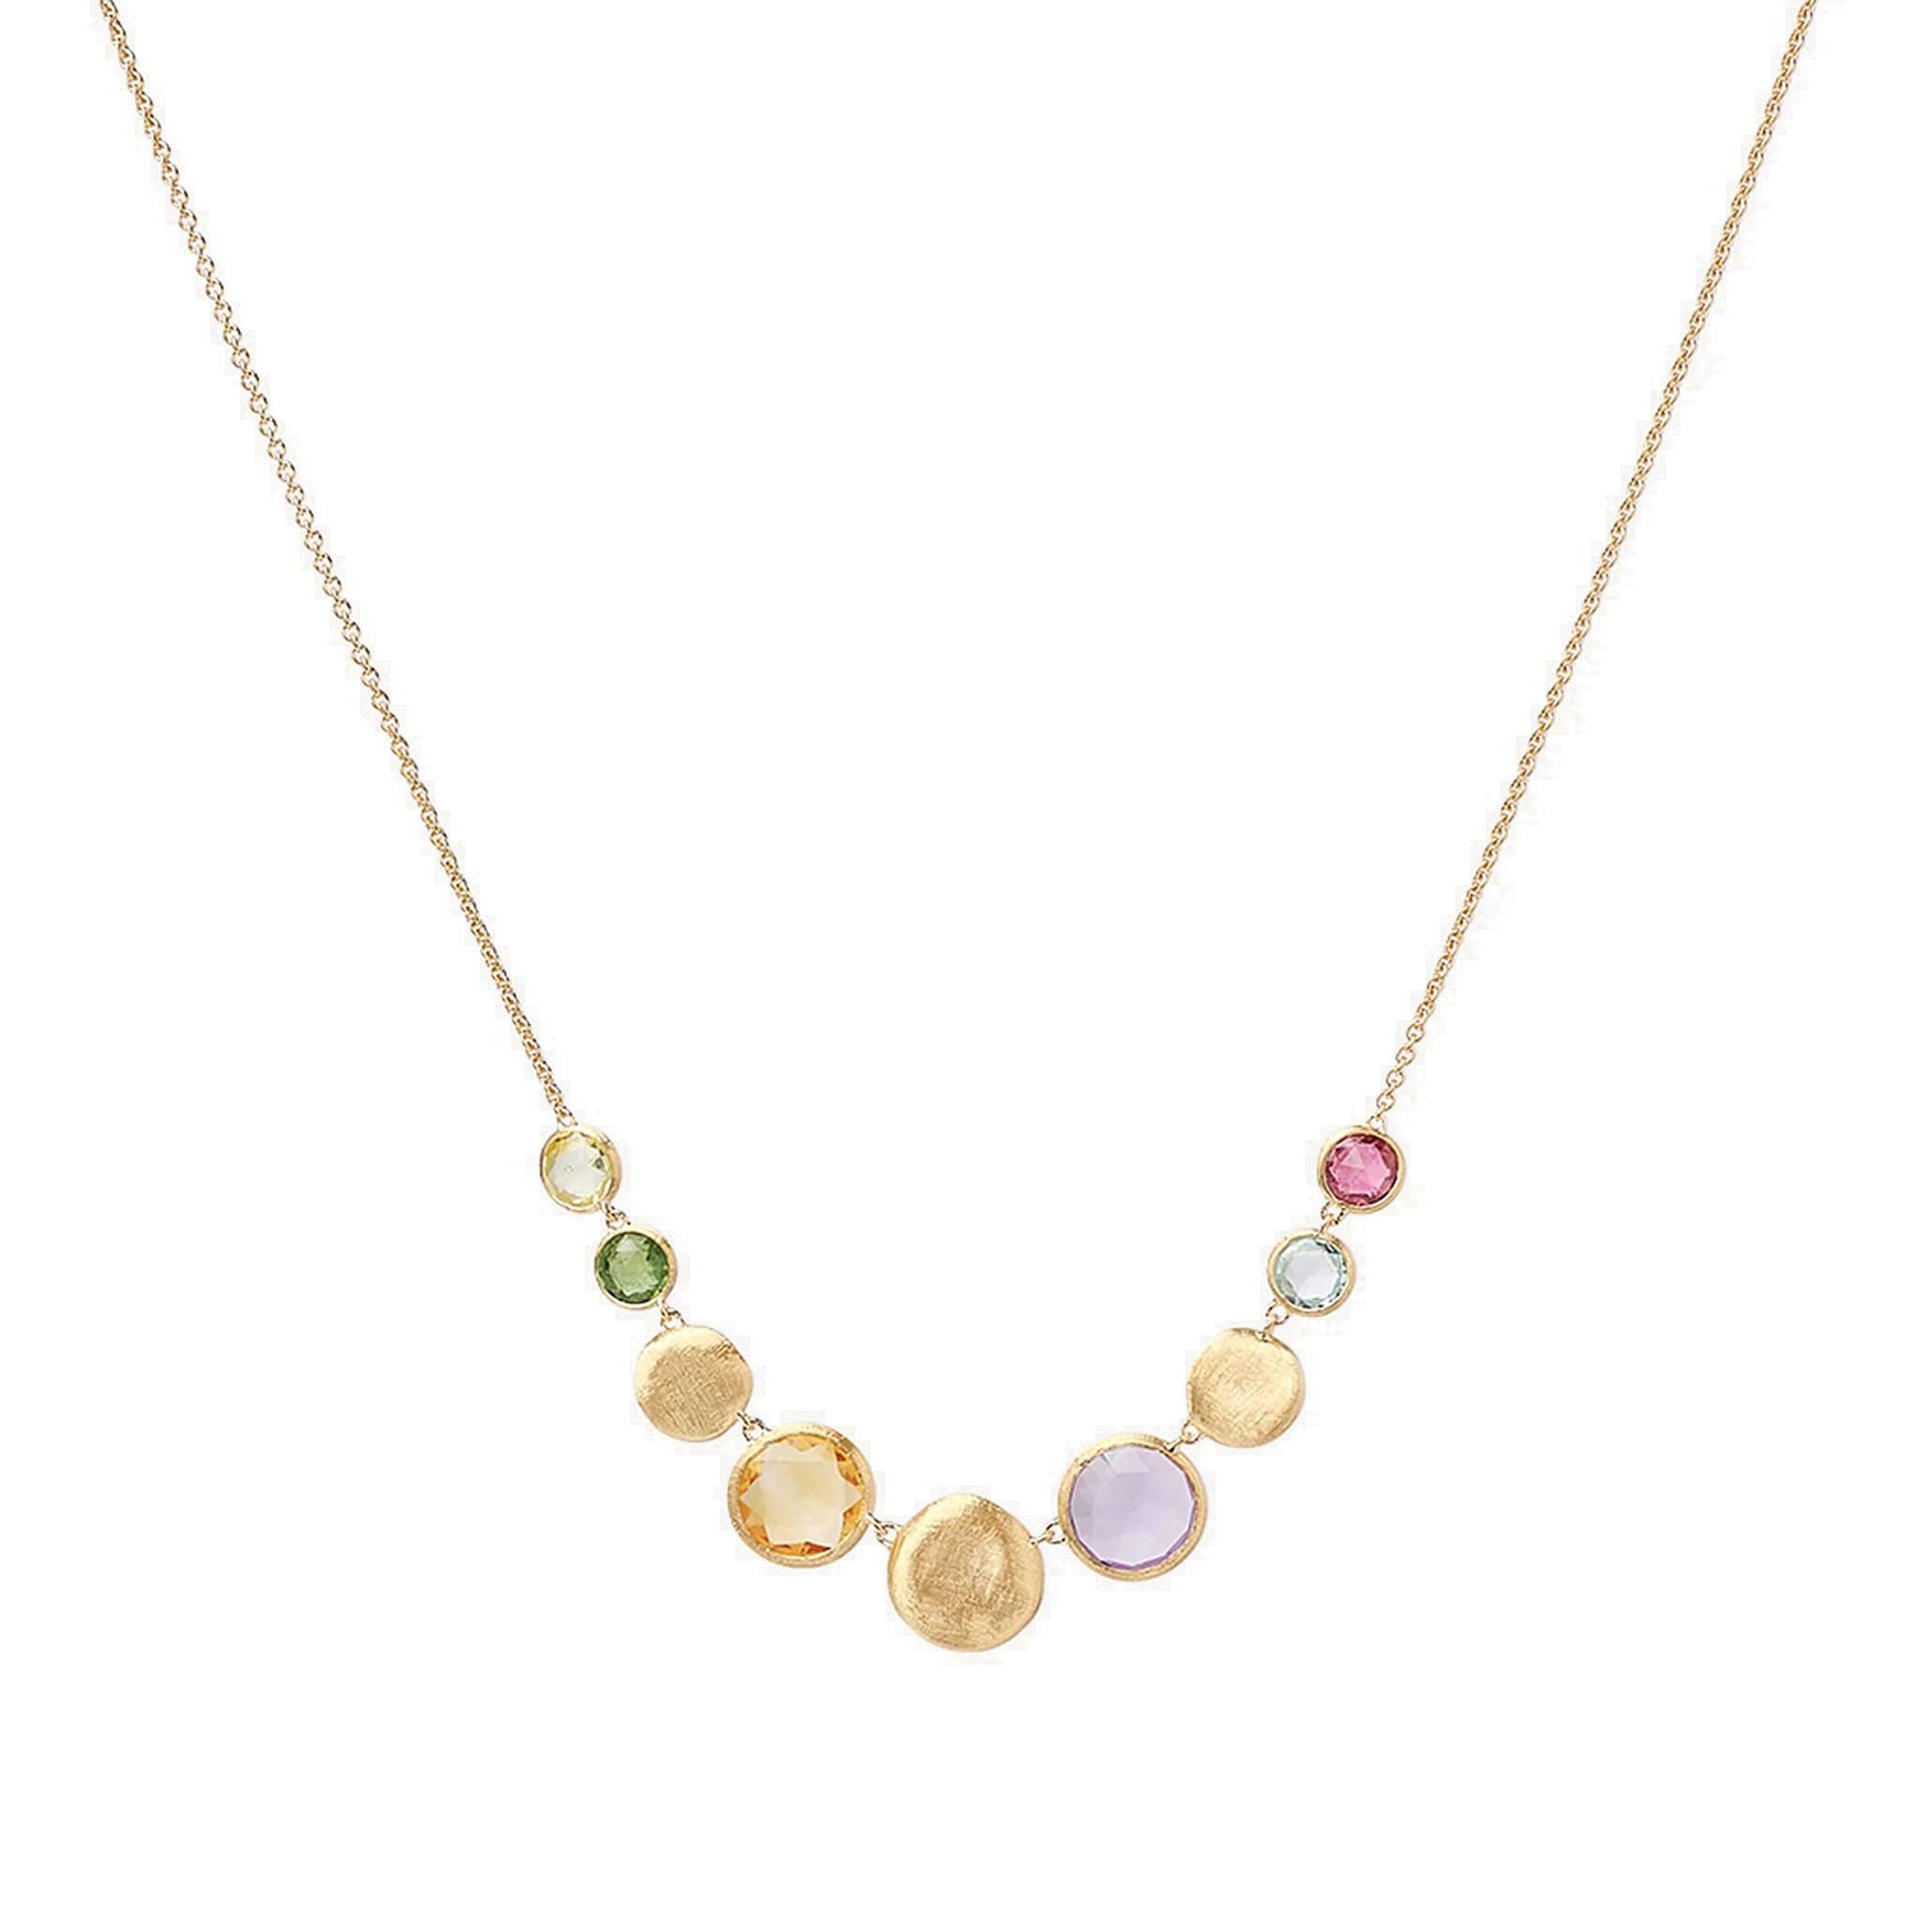 Marco Bicego Jaipur Color Mixed Stone Halfsie Necklace